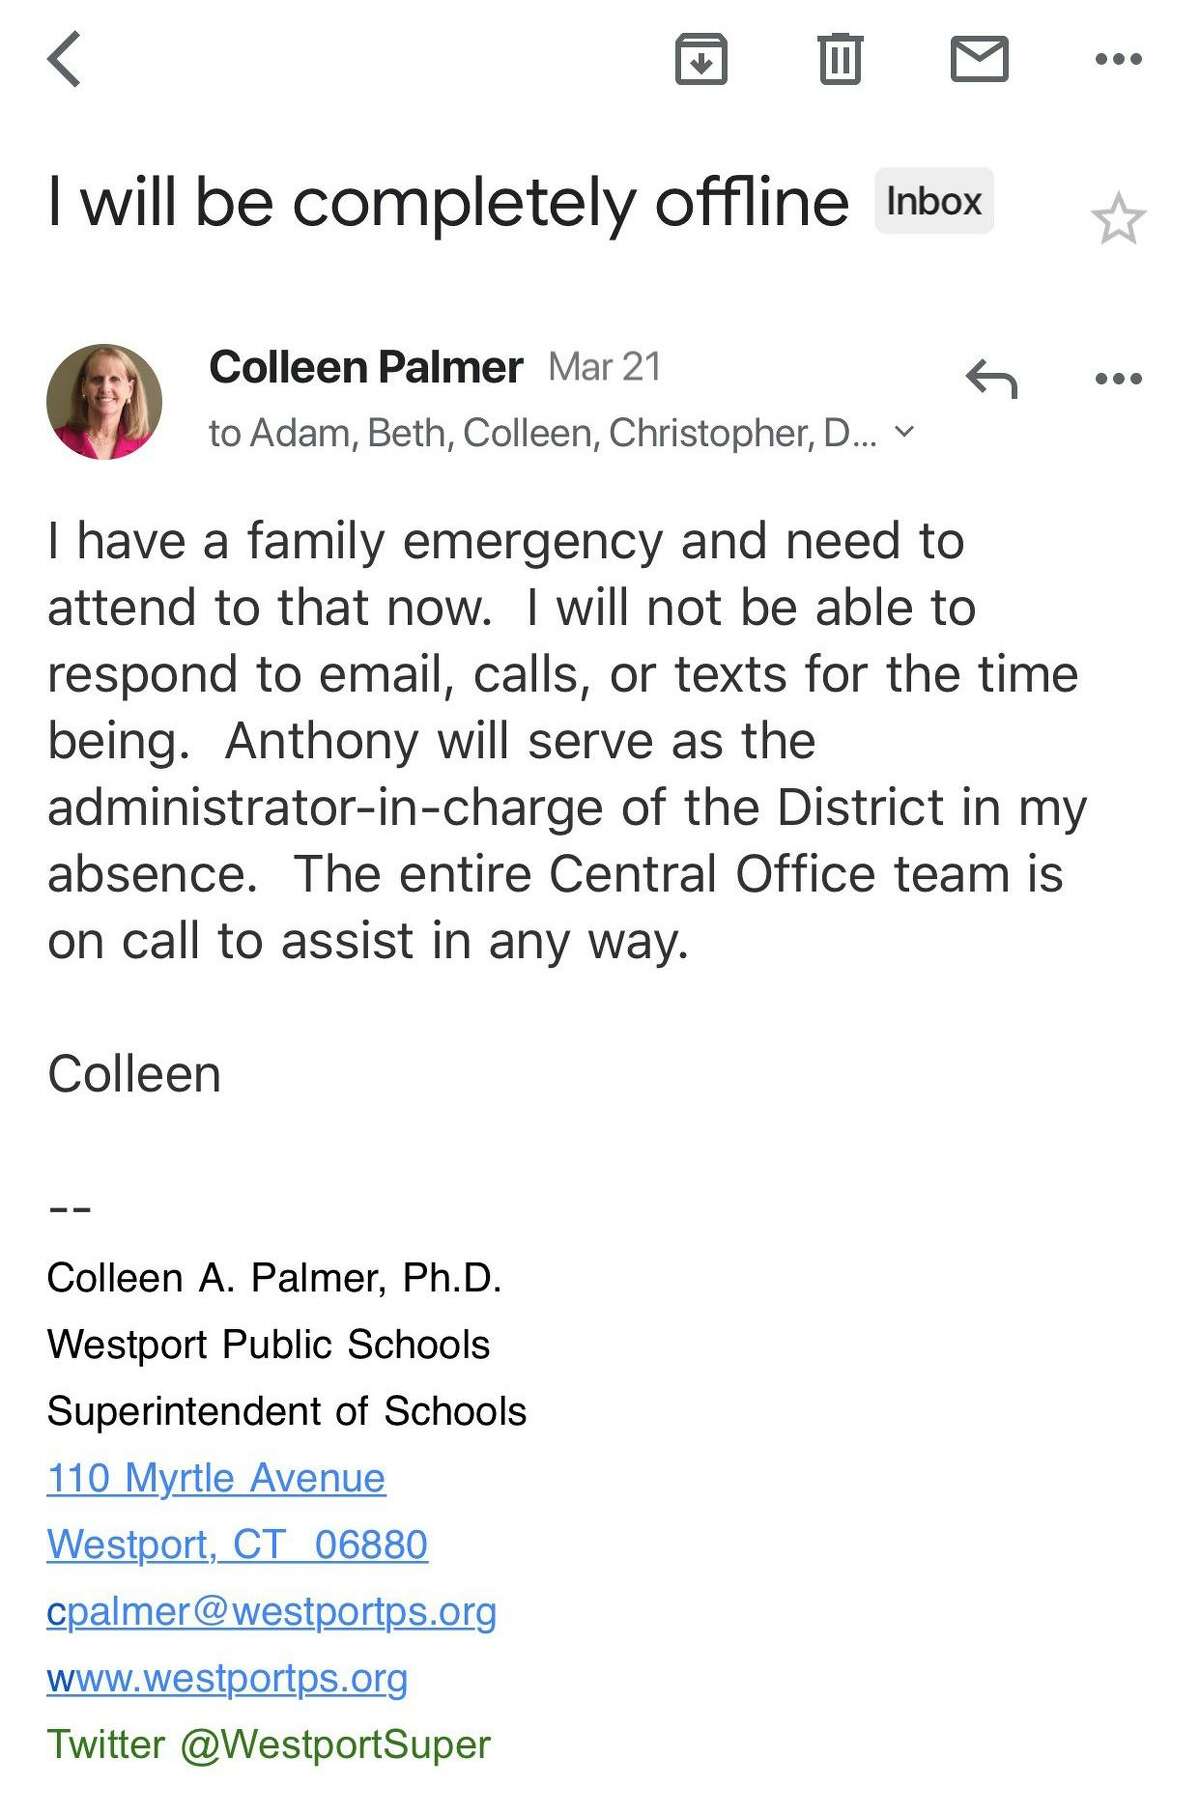 Westport Superintendent Colleen Palmer sent a note to Westport Public School administrators on March 21 announcing she will be offline for a family emergency and Anthony Buono will serve as the administrator in charge in her absence.